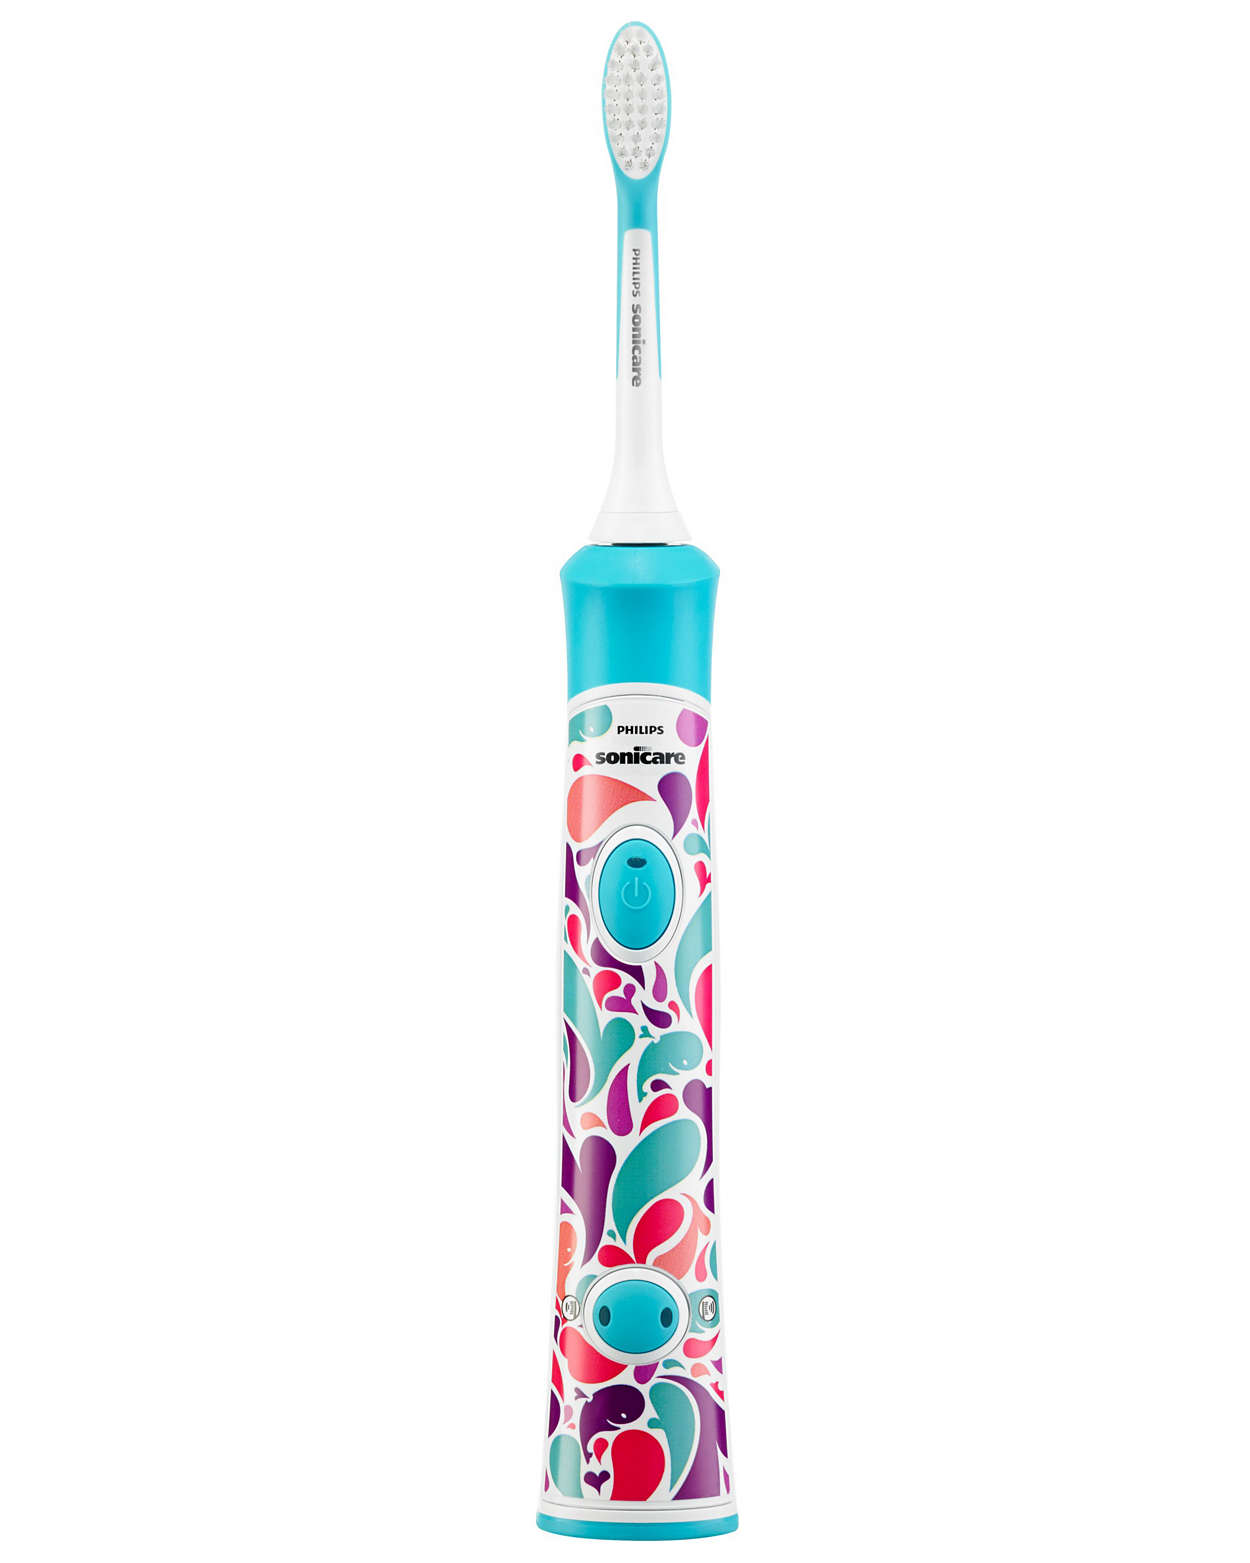 sonicare toothbrush will not turn on